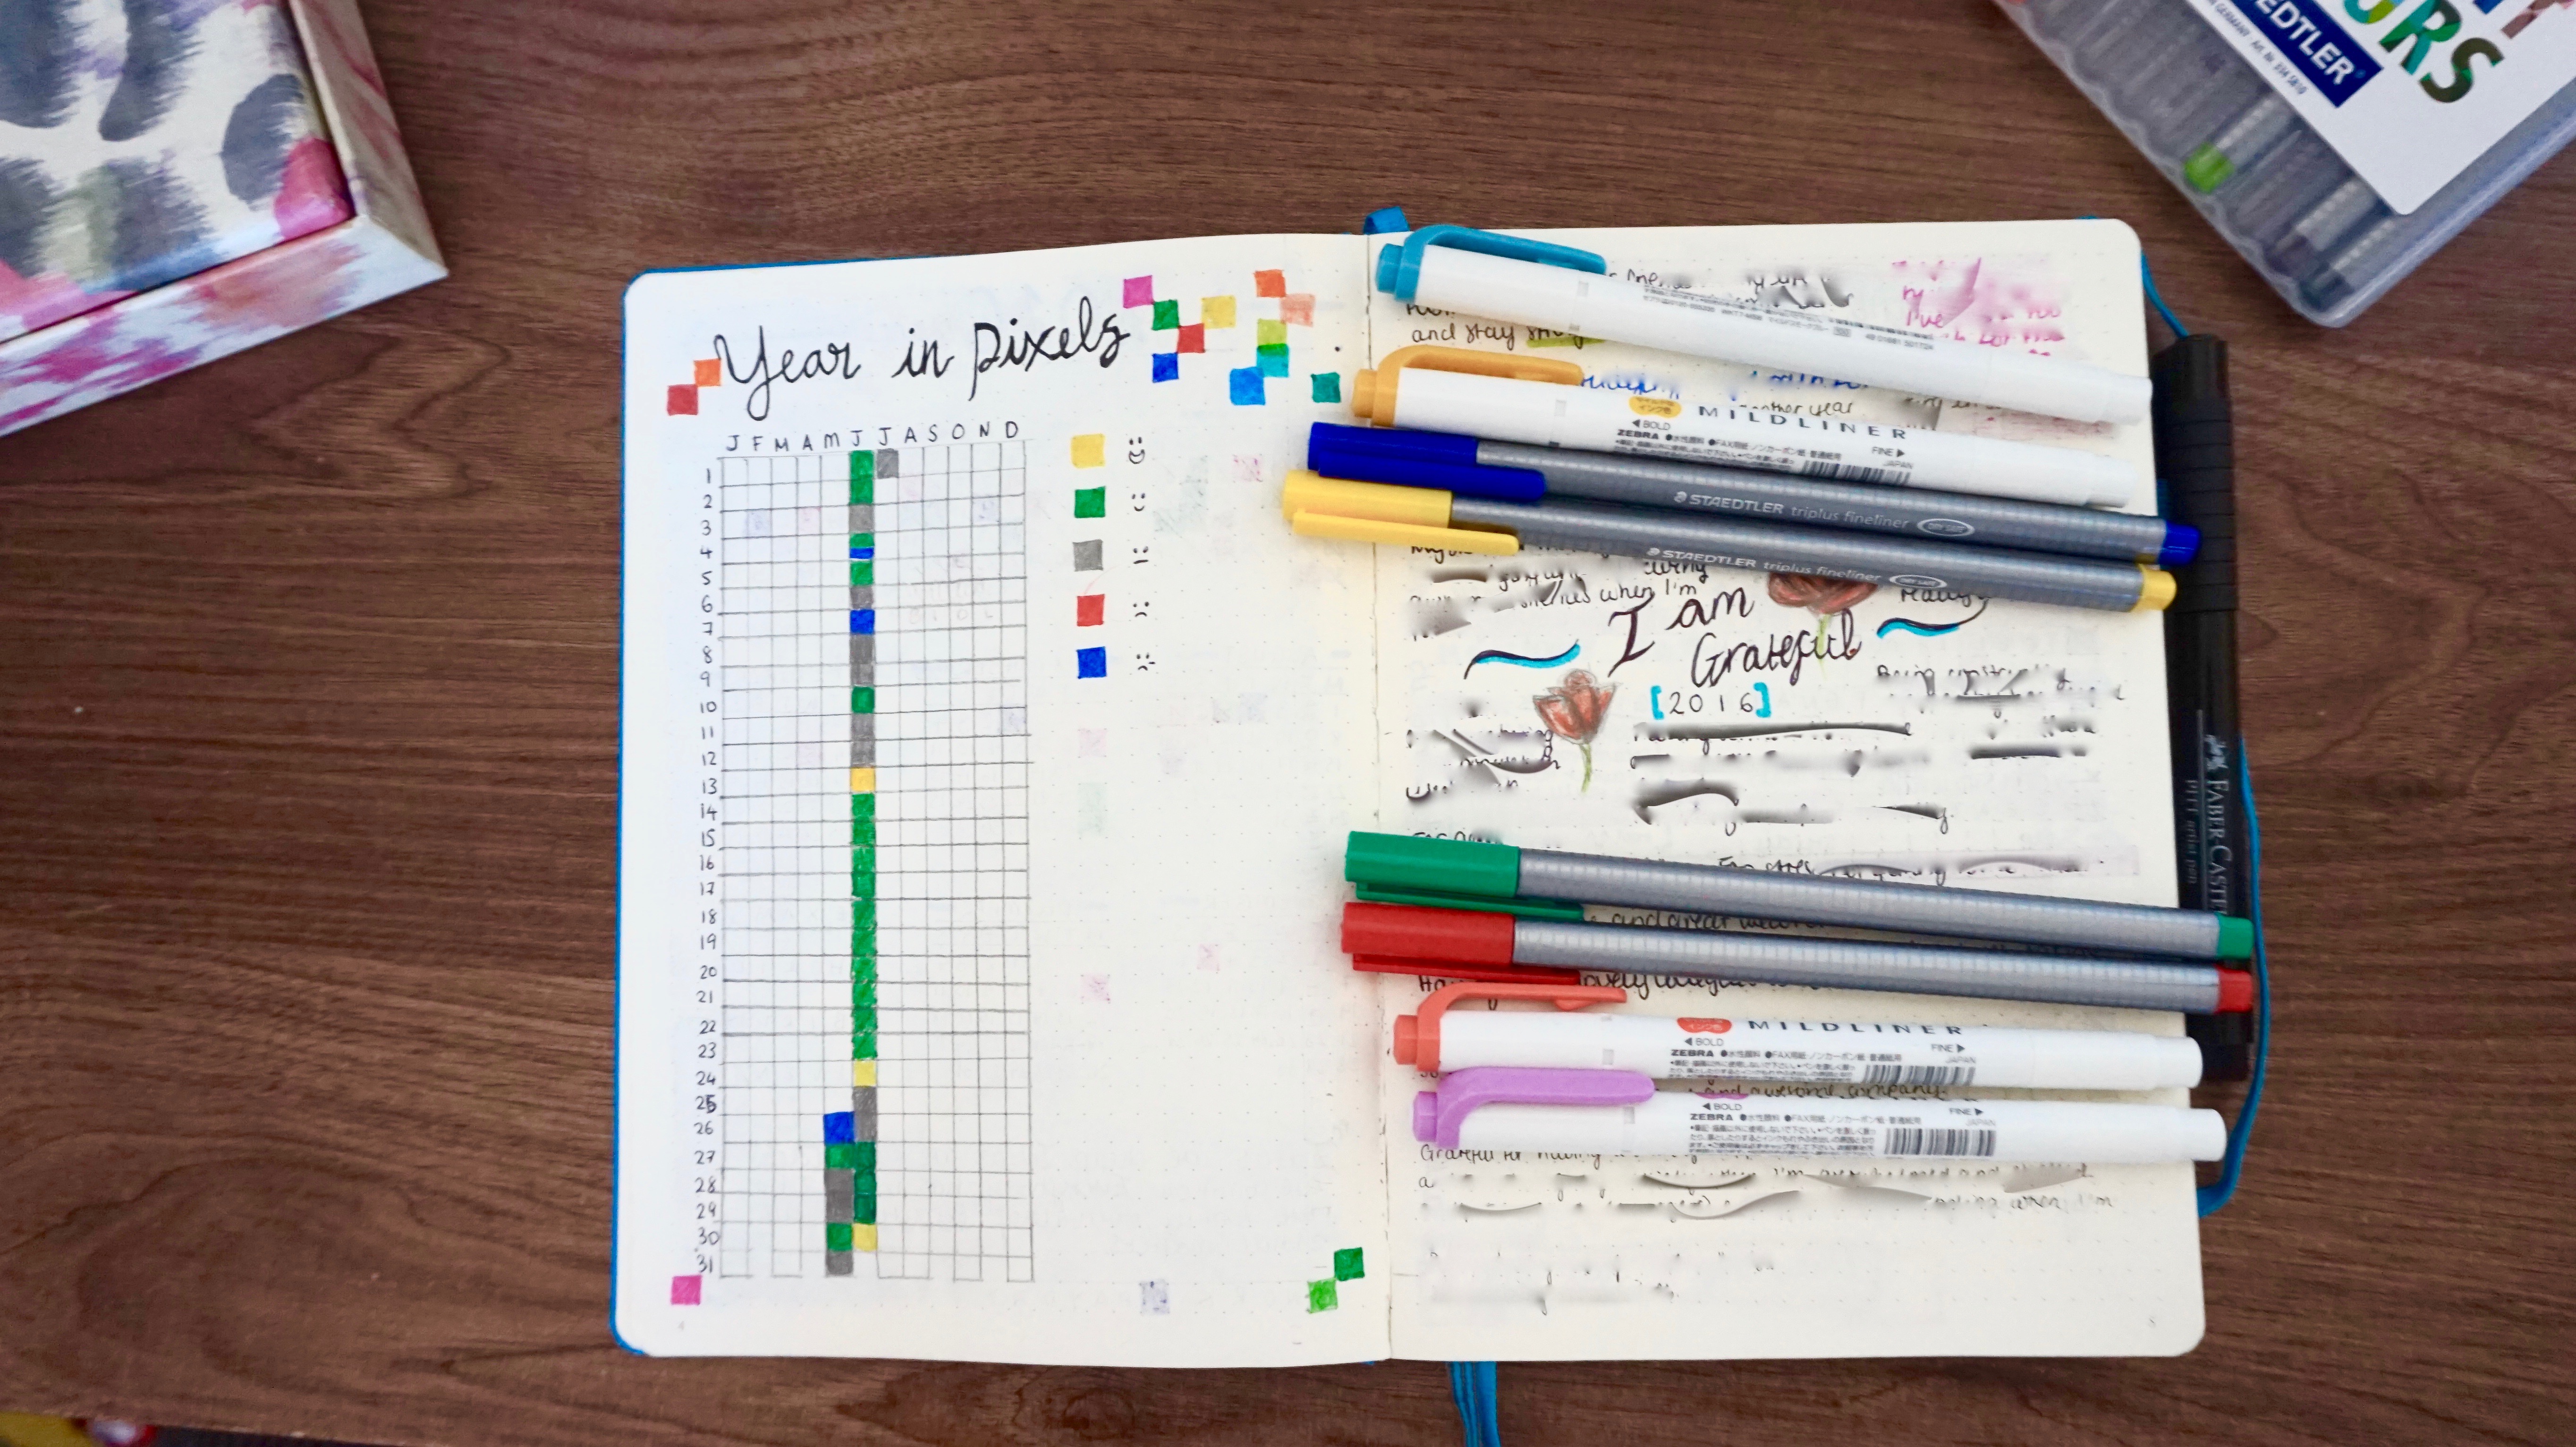 My "Year In Pixels" log and Gratefulness log (that I recently filled up and had to start a new one!) It's blurred because most of it is quite personal.